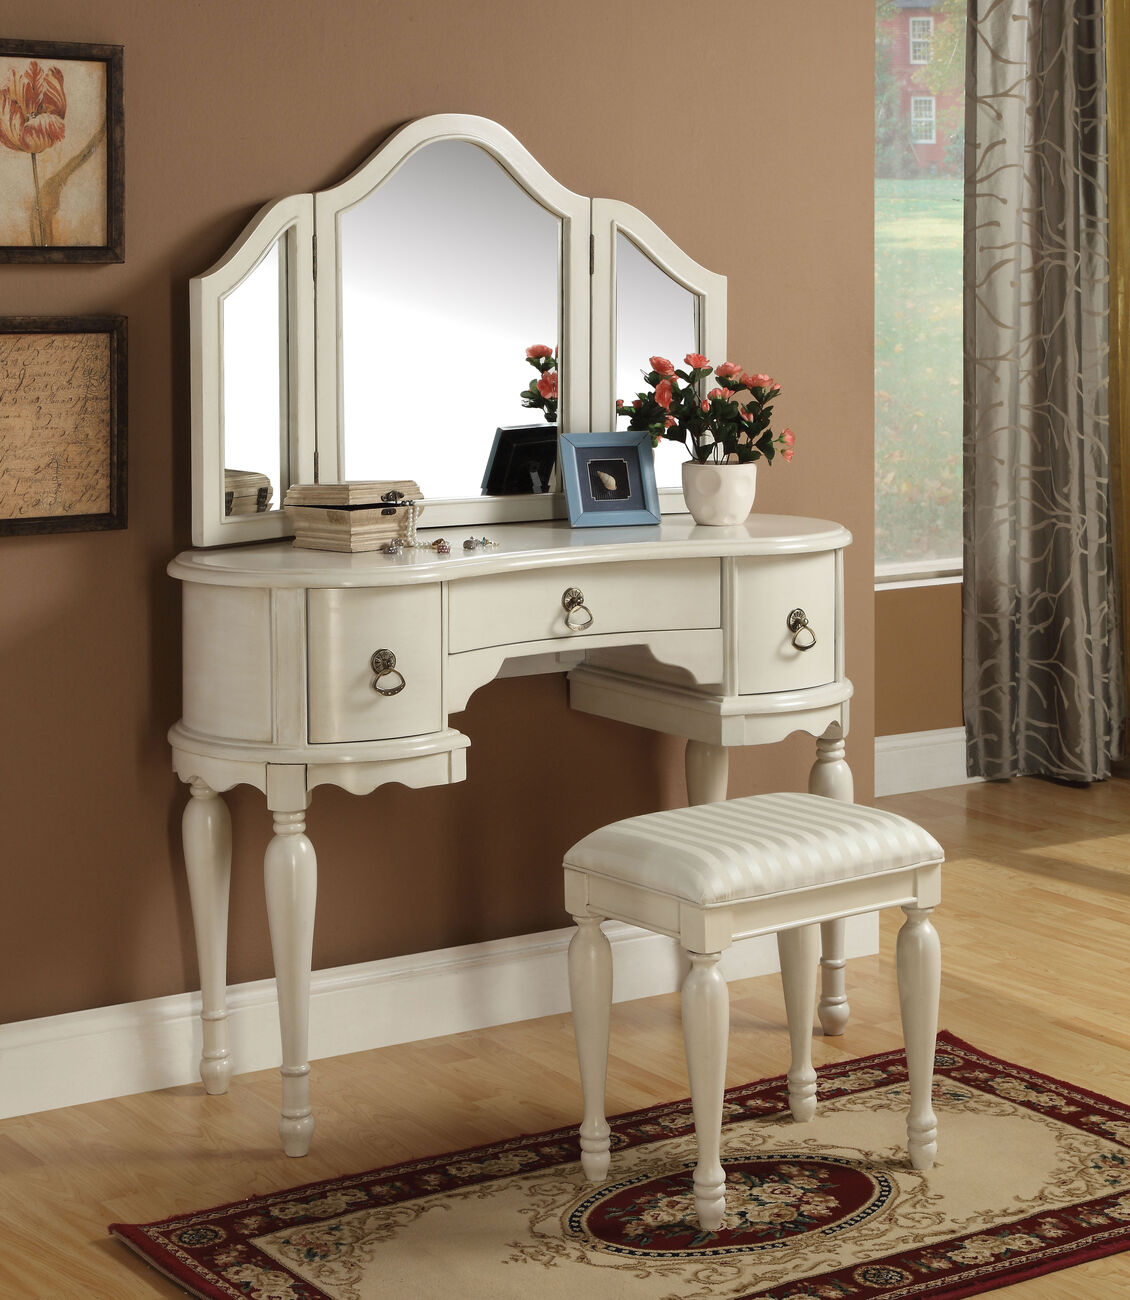 Wooden Vanity Set with 3 Drawer Table and Fabric Upholstered Stool, Cream